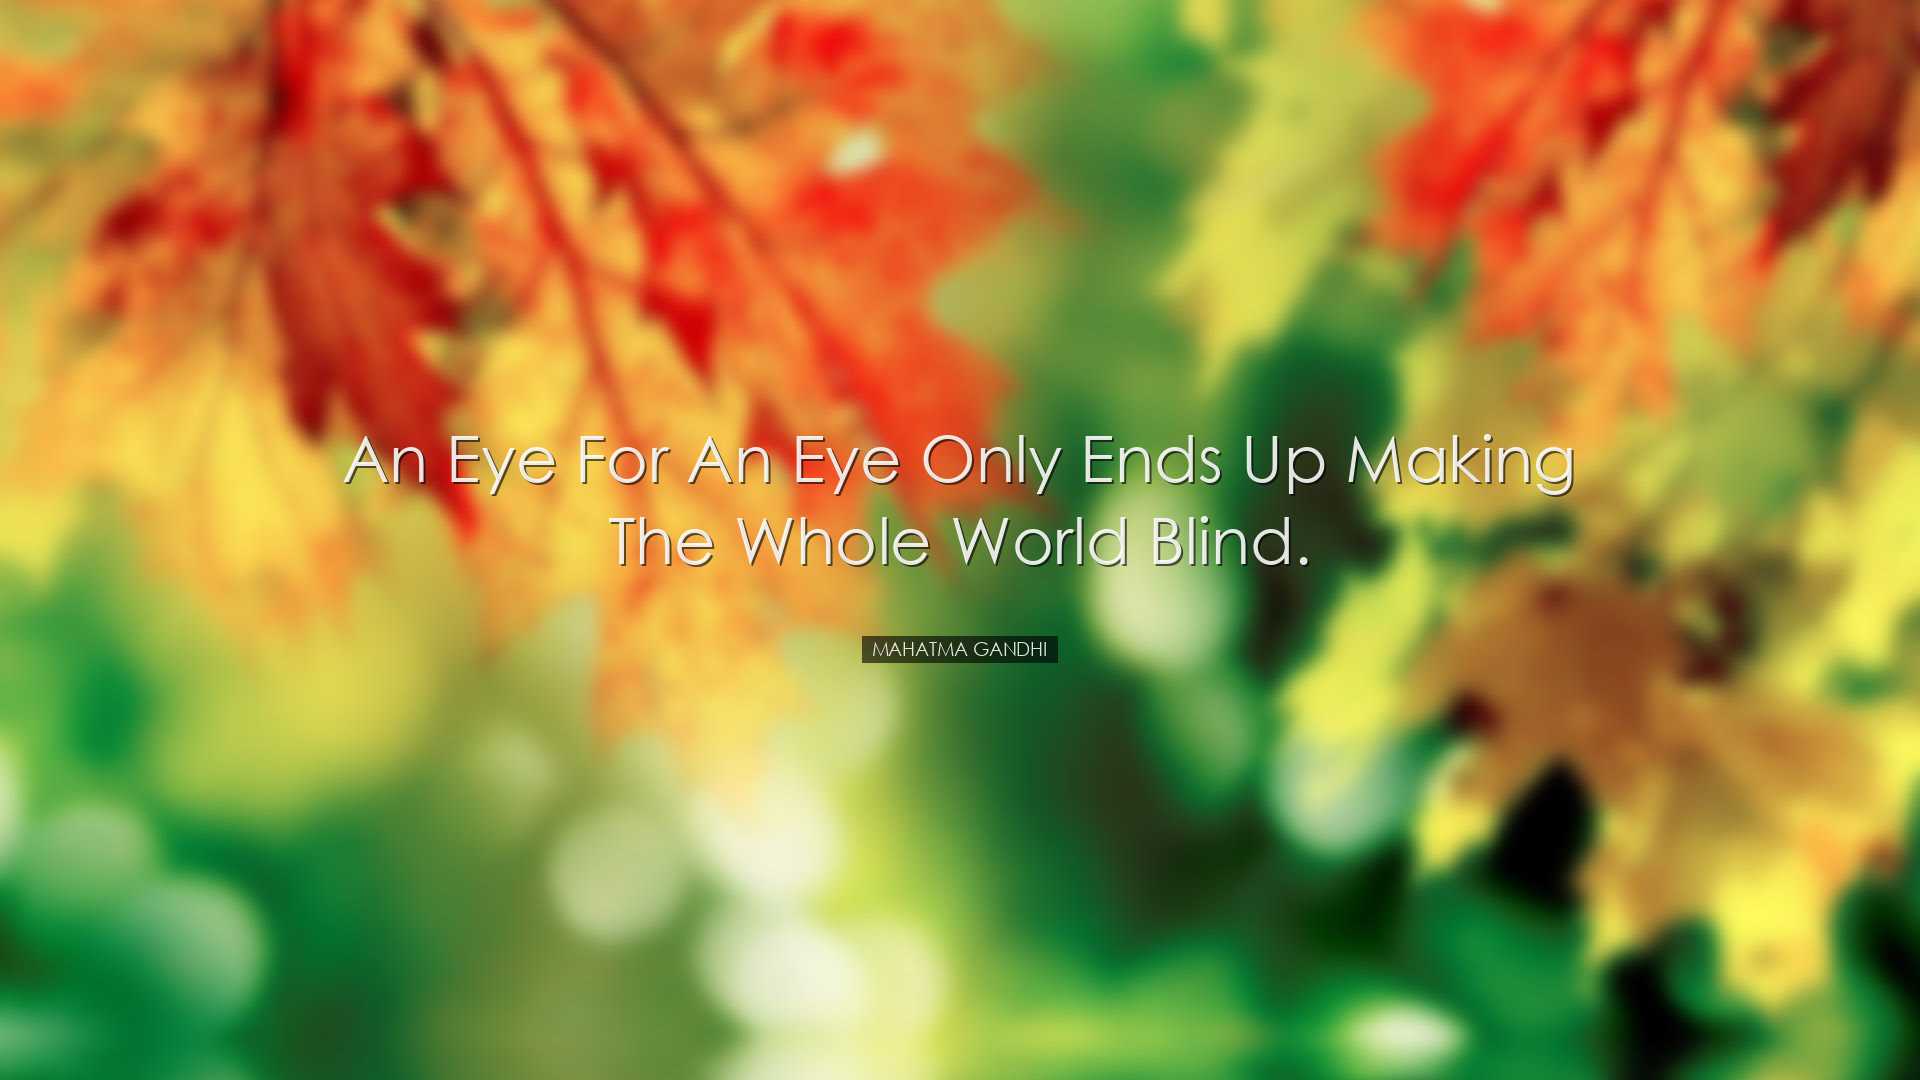 An eye for an eye only ends up making the whole world blind. - Mah